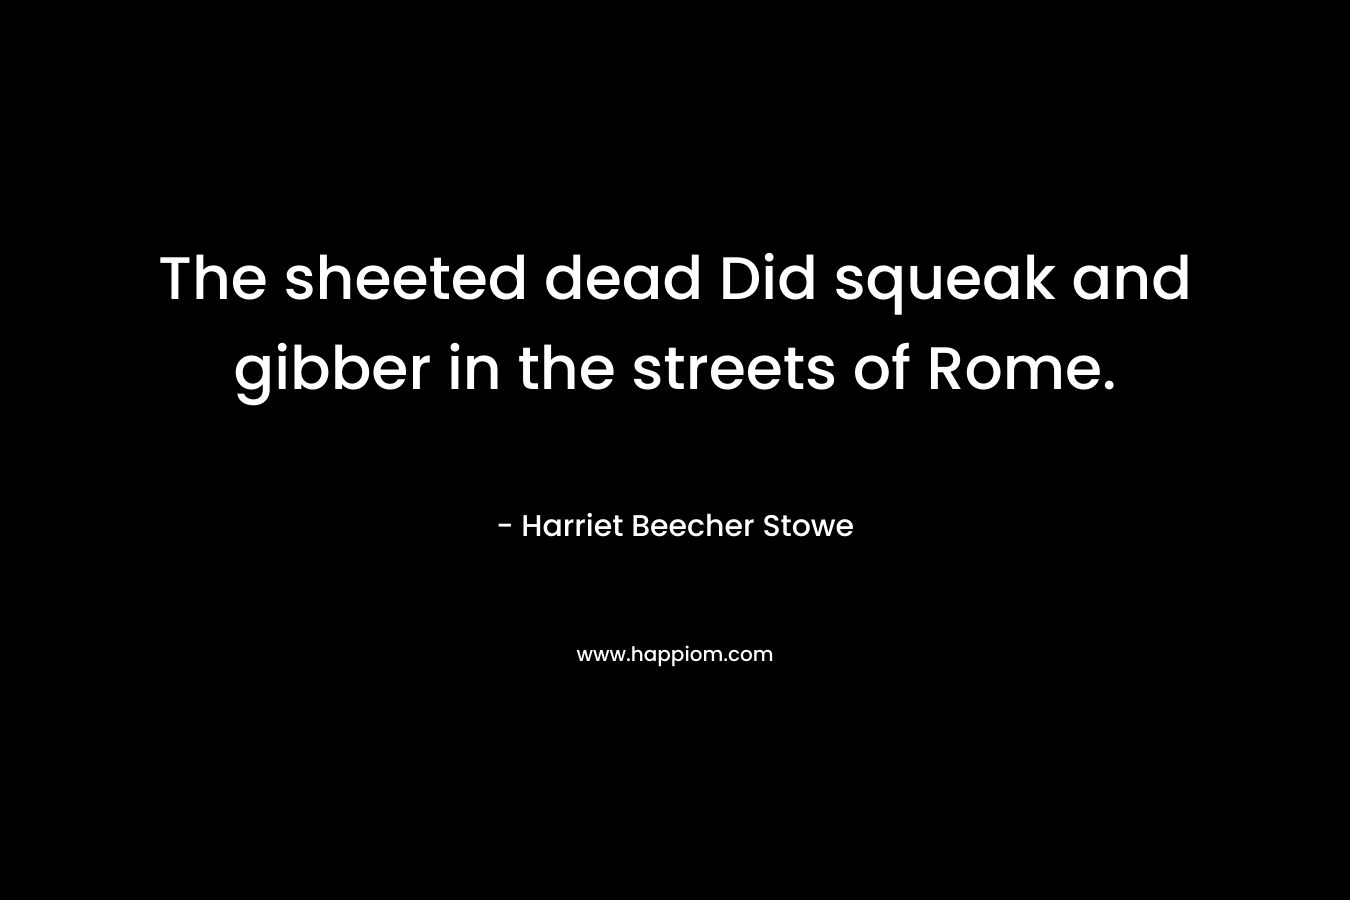 The sheeted dead Did squeak and gibber in the streets of Rome. – Harriet Beecher Stowe